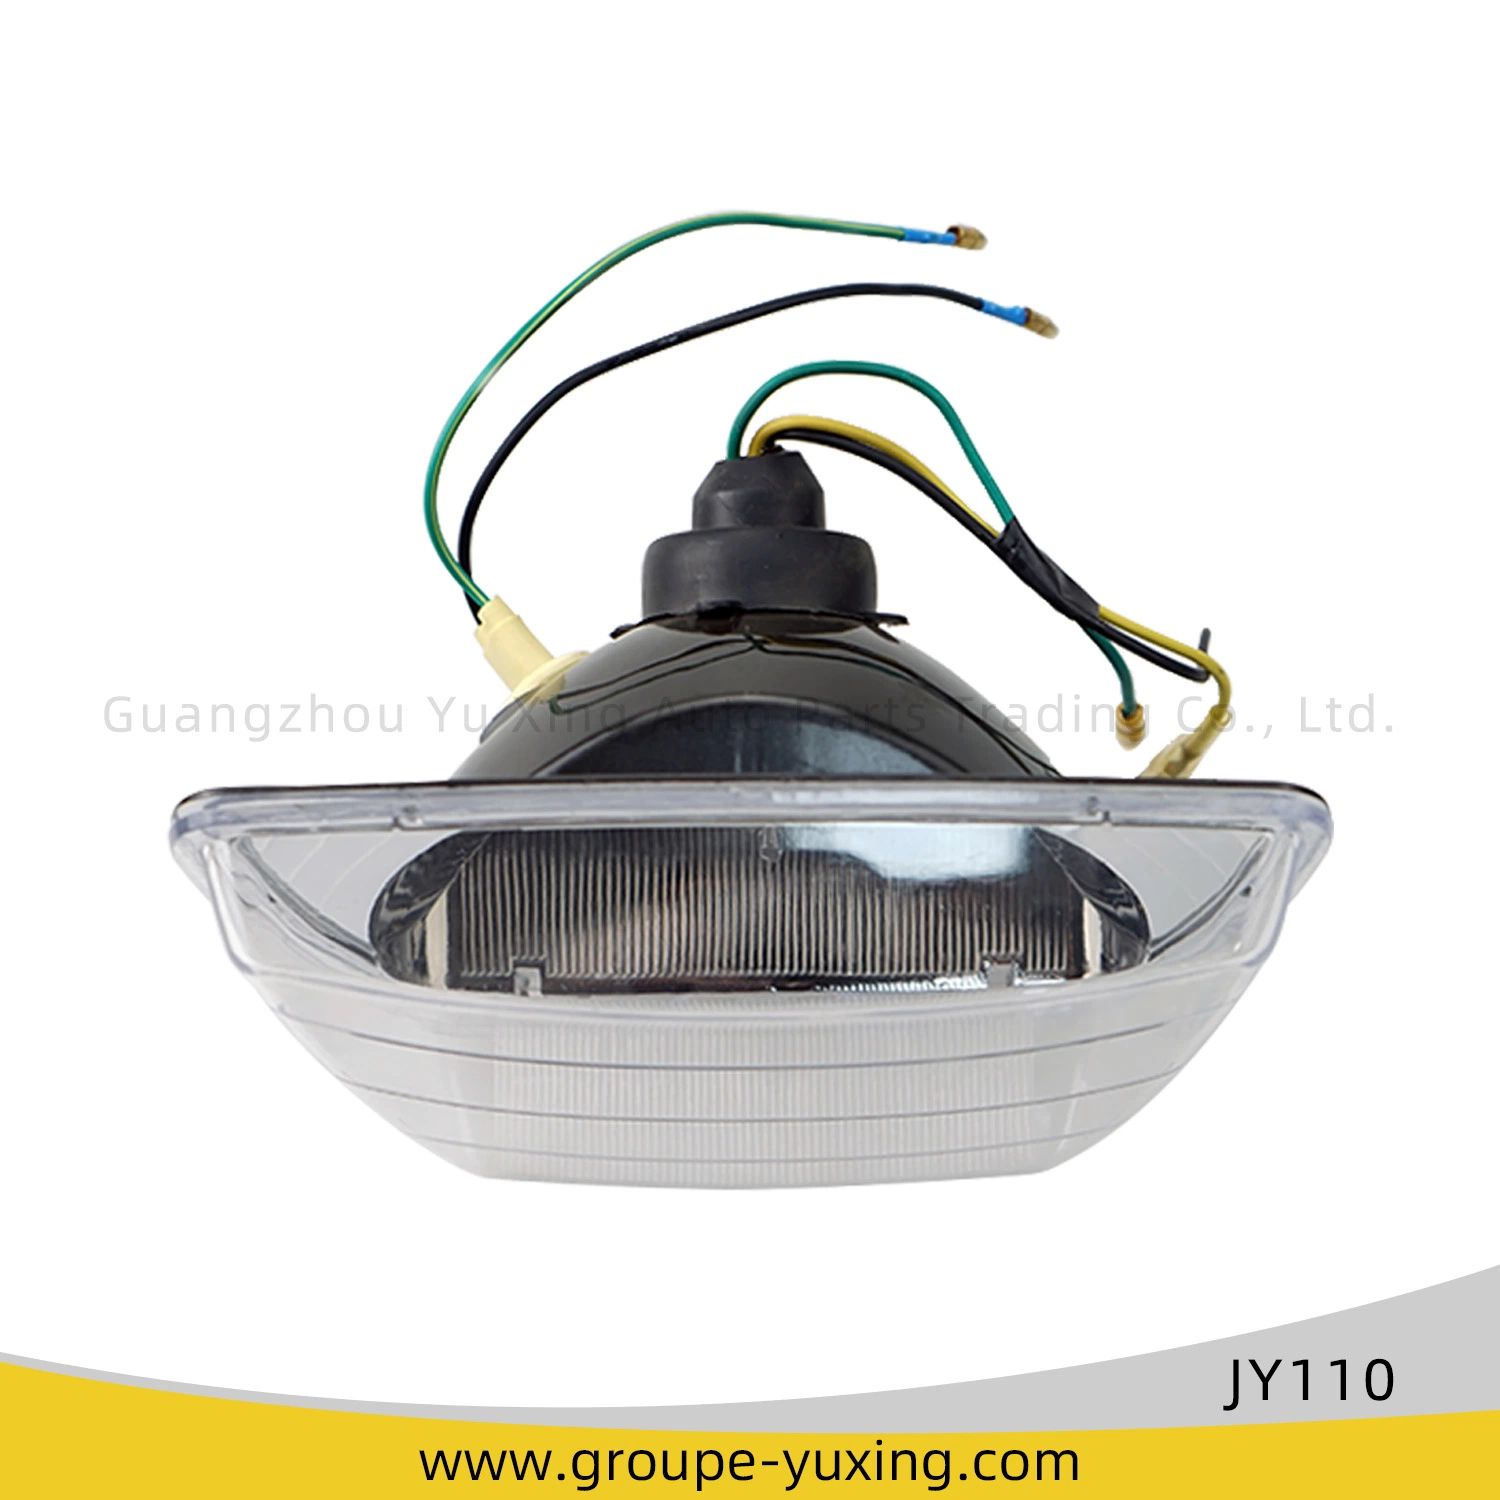 Motorcycle Spare Part Head Lamp Motorcycle Part